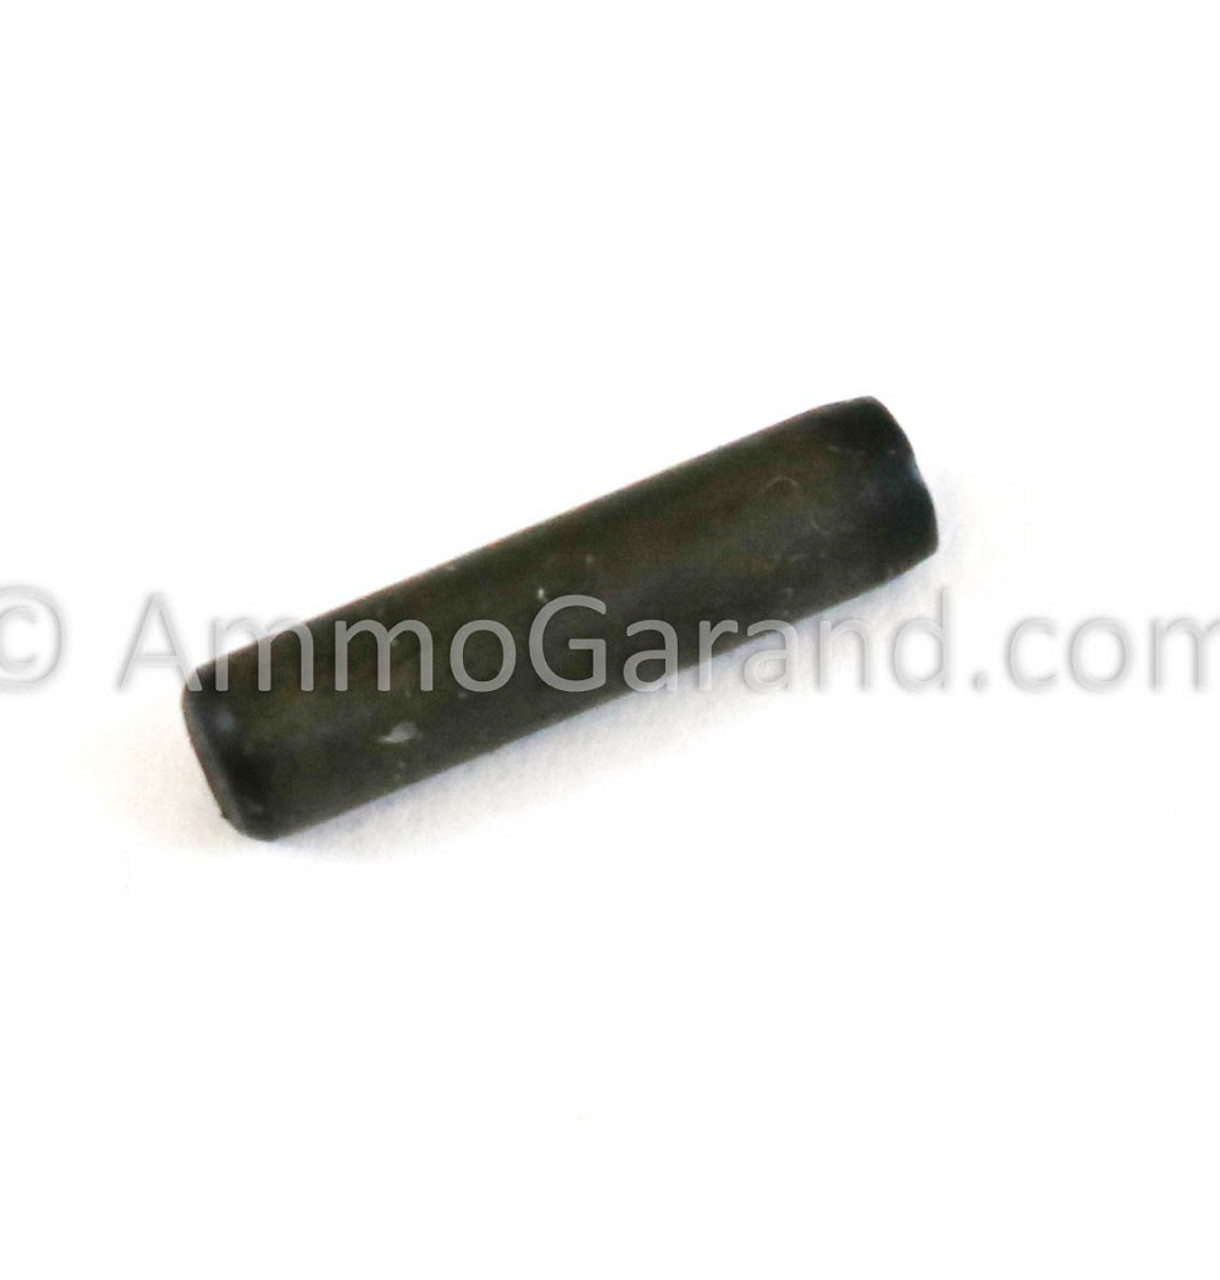 M1 Garand Solid Lower Band Pin WWII Style - NEW